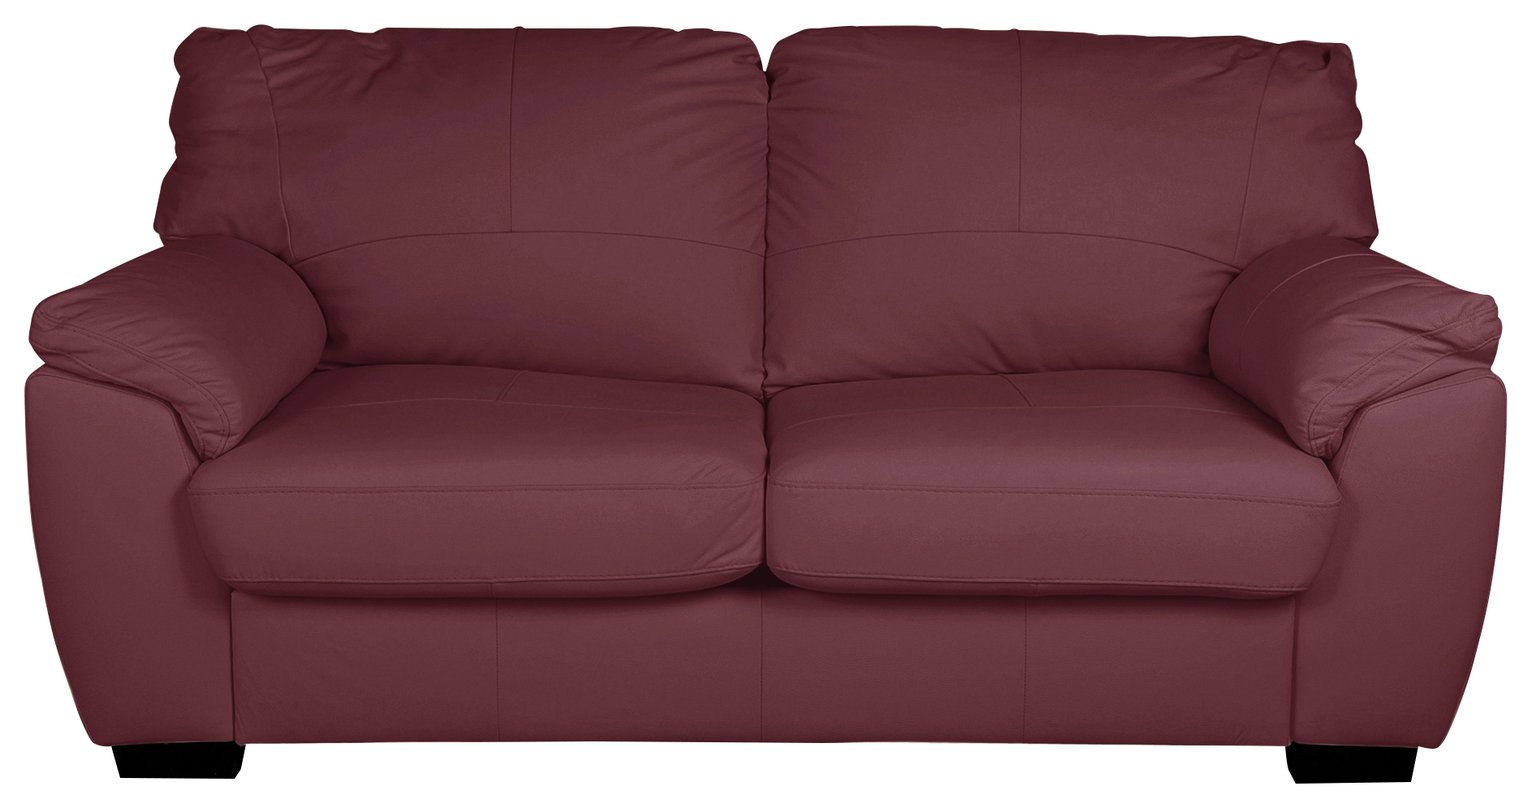 Argos Home Milano 2 Seater Leather Sofa Bed - Burgundy (3435957